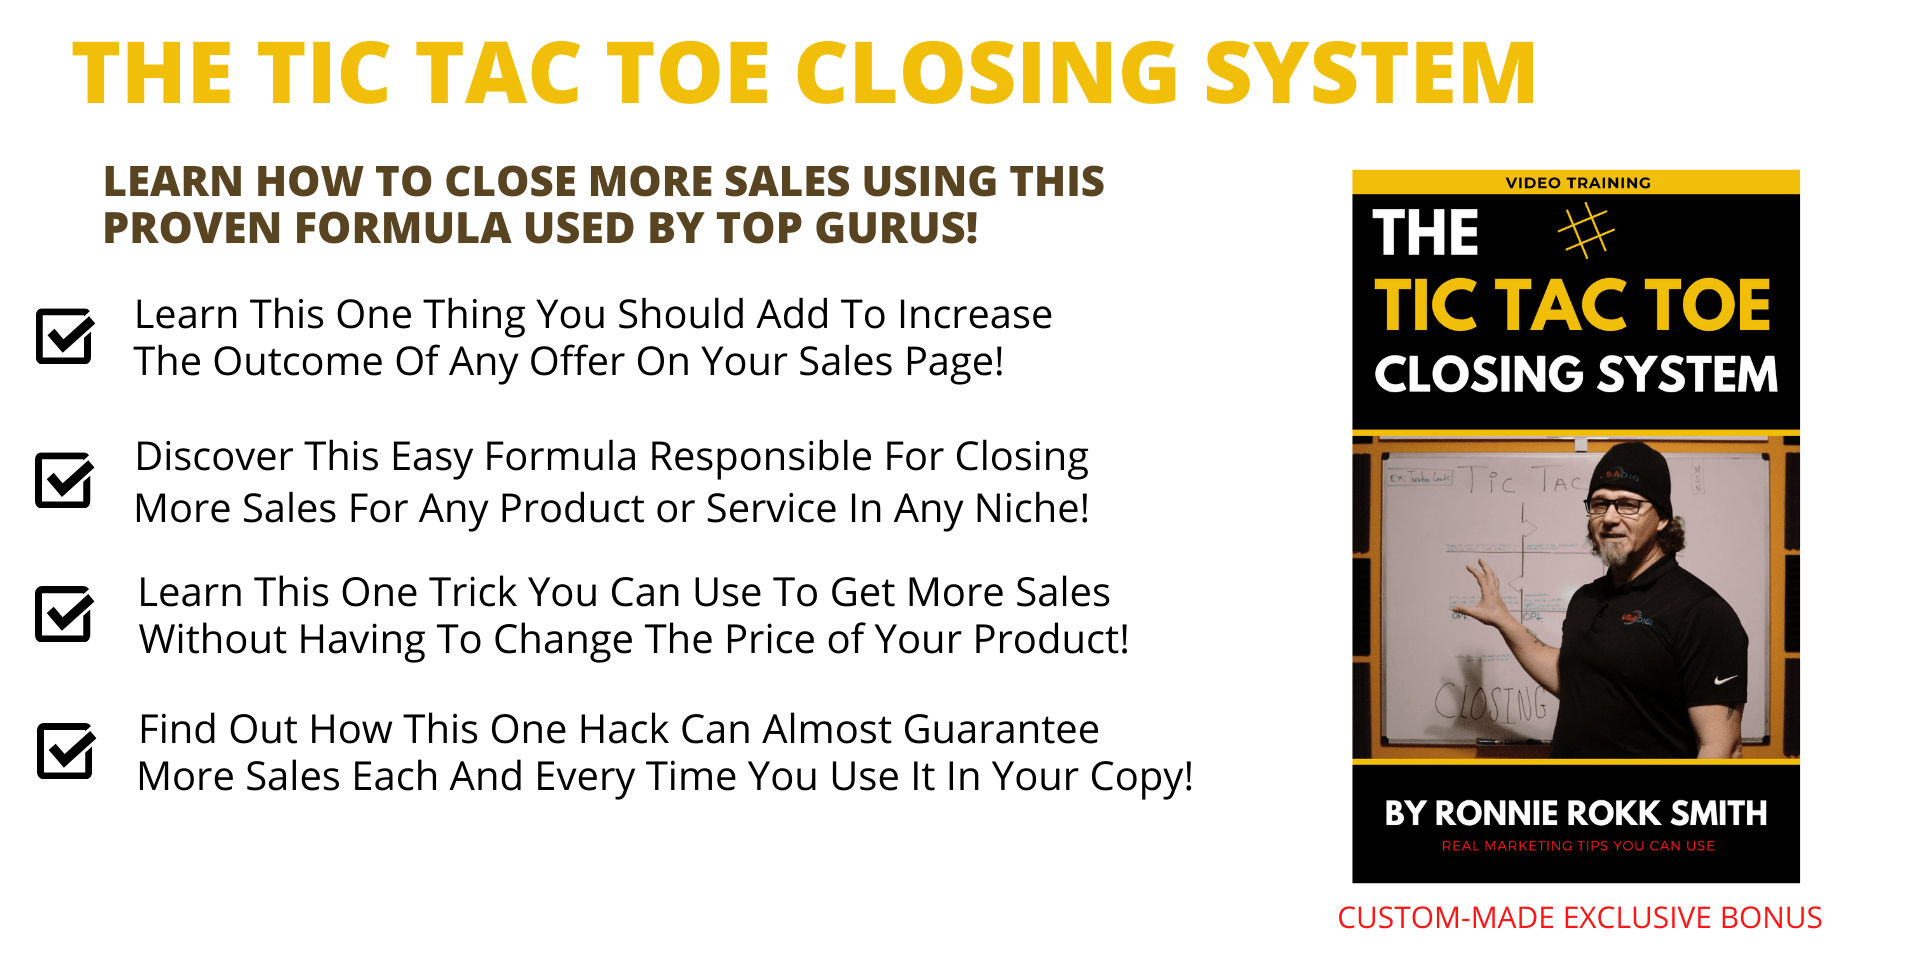 The Tic Tac Toe Closing System